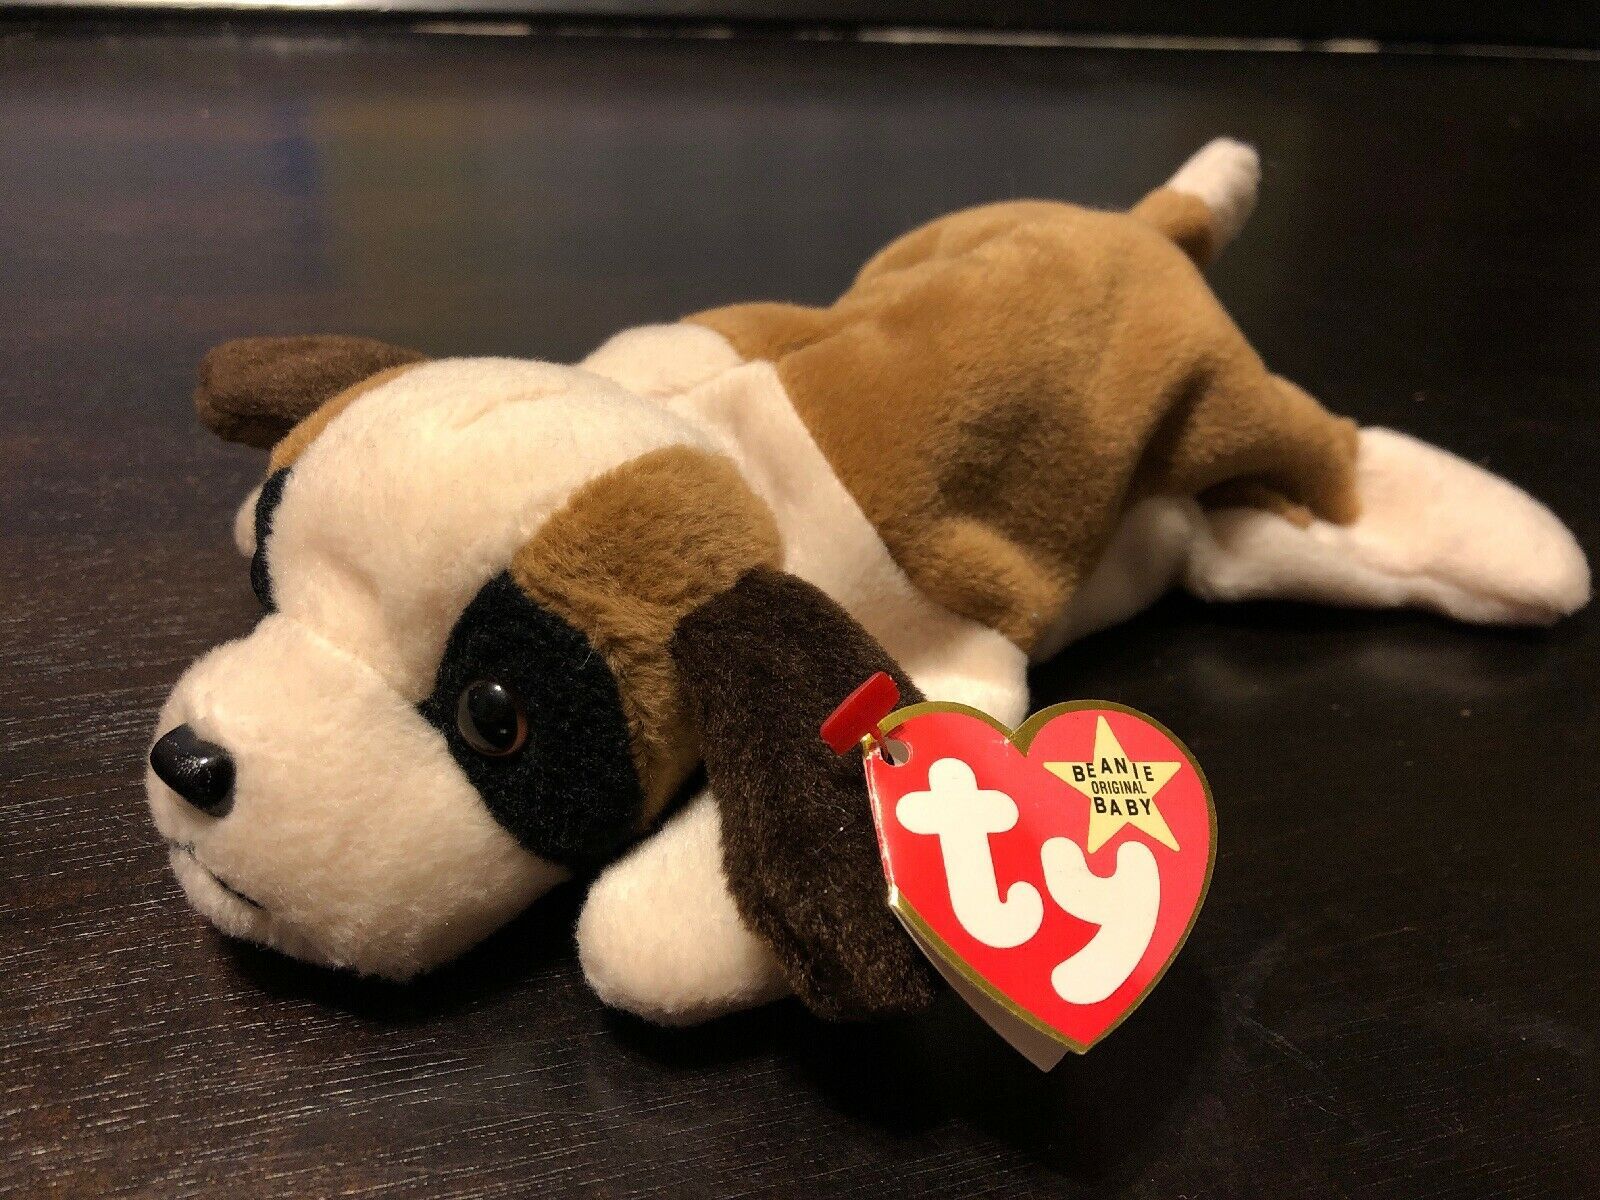 Vintage TY Original Brand Original Beanies Collection Dog “Bernie” with NO Tag in Excellent Condition!